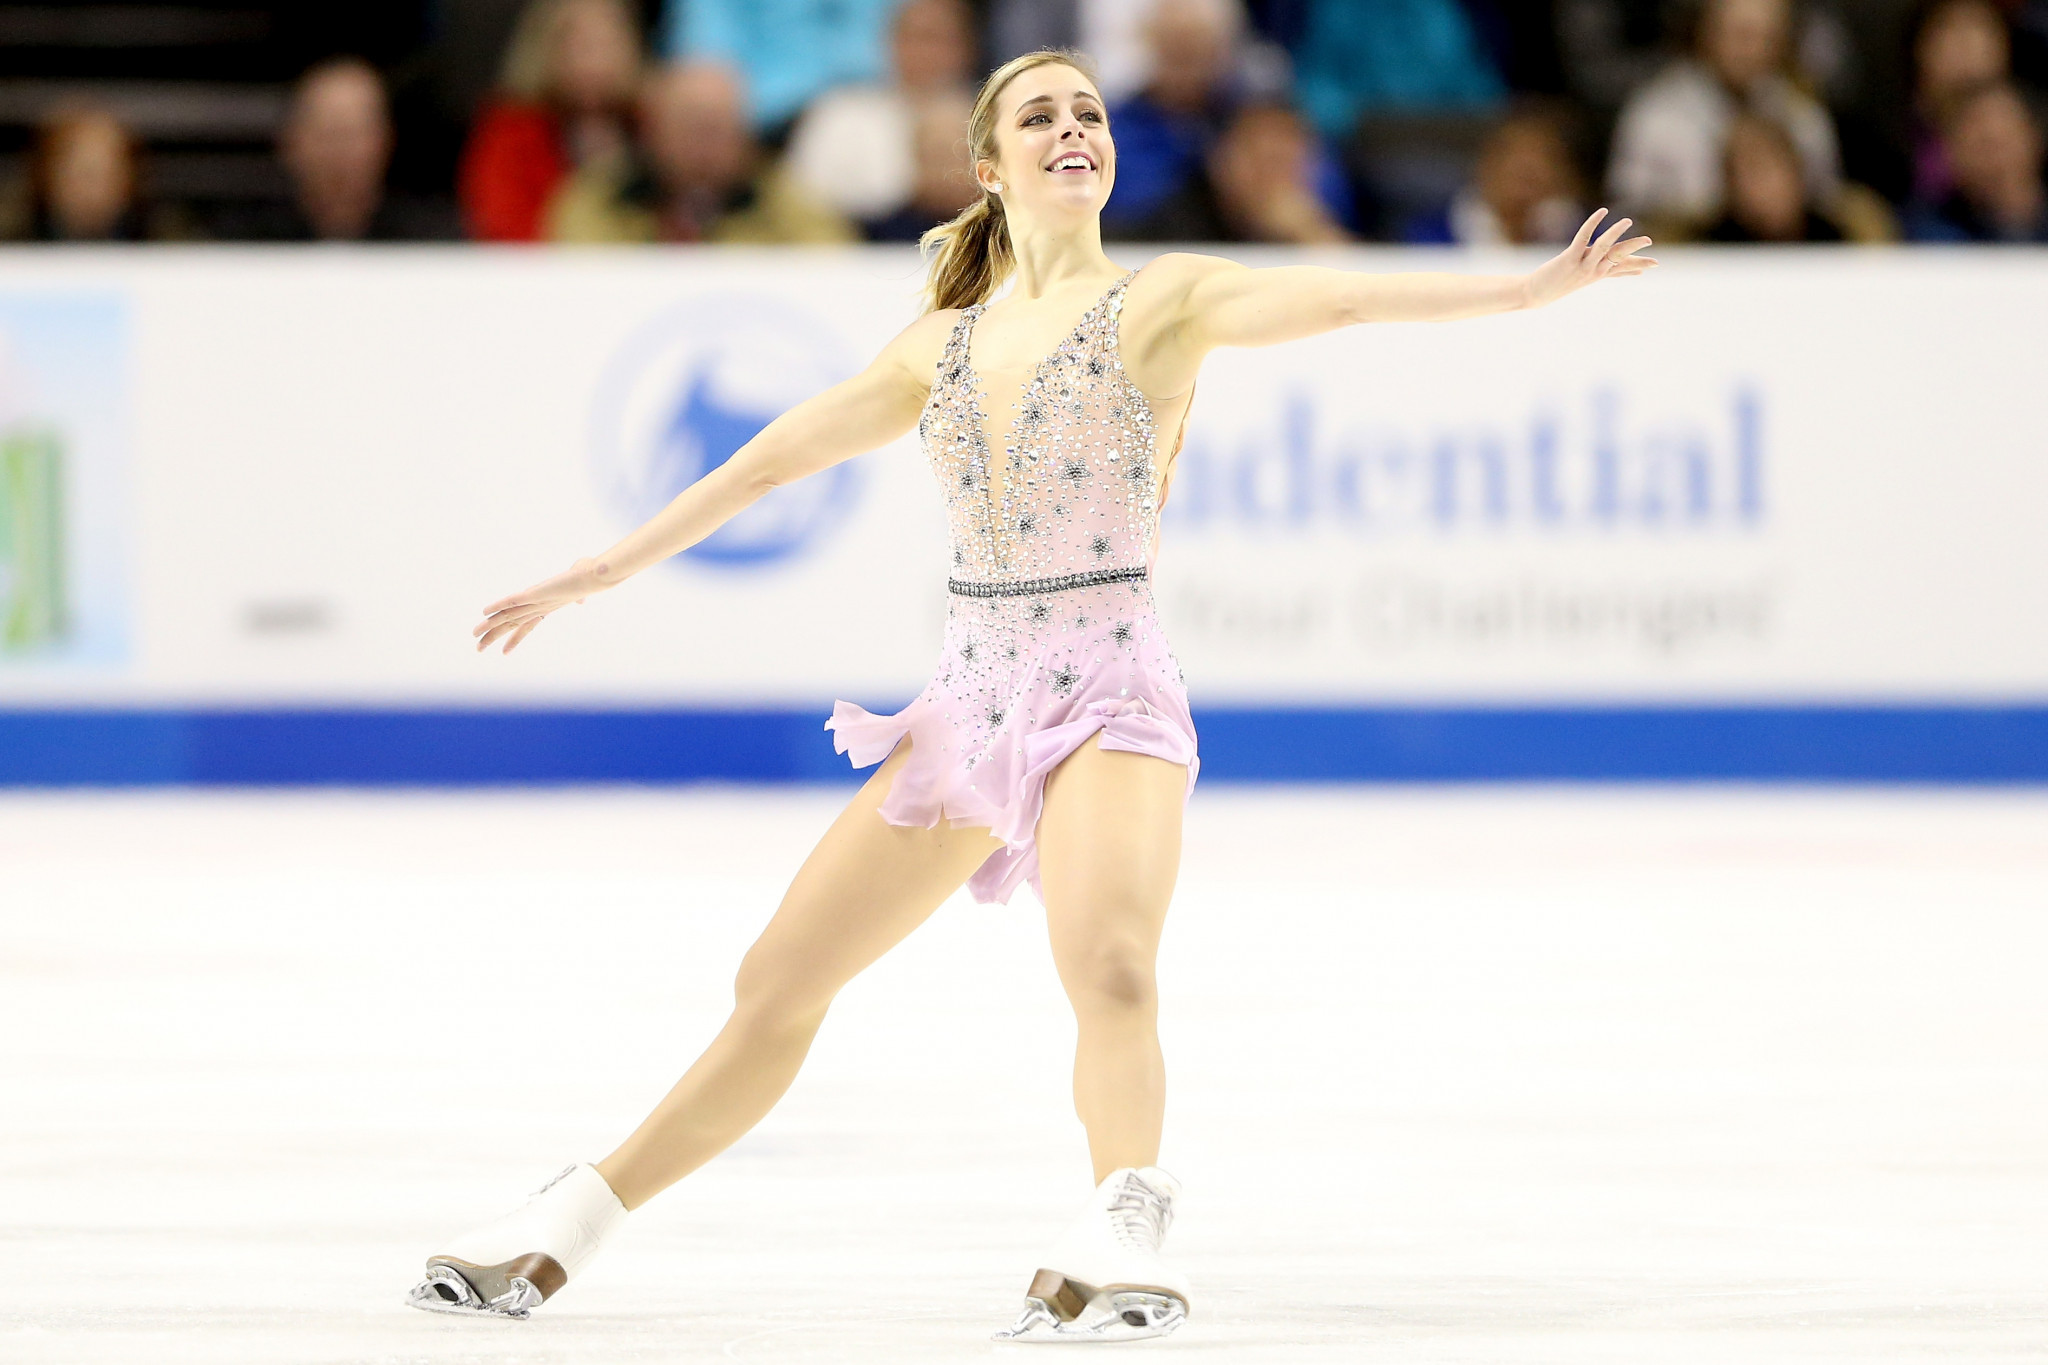 Wagner accuses late figure skater Coughlin of sexual assault